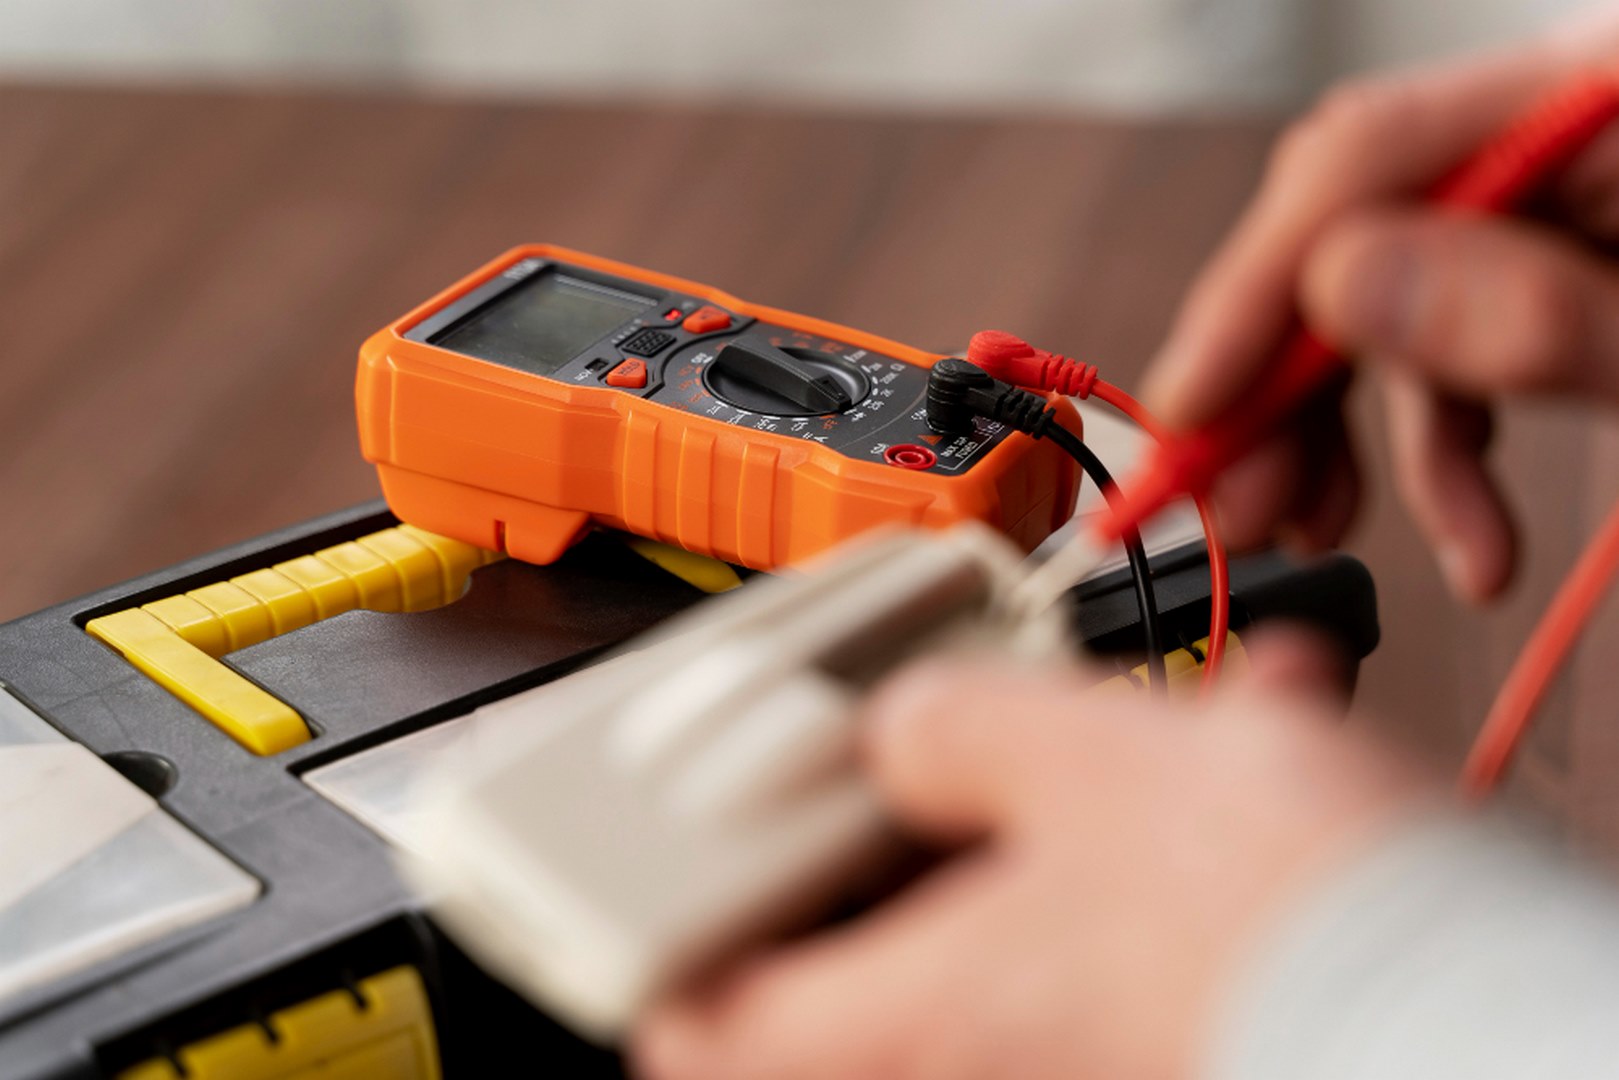 electrical - How can I figure out cordless drill terminal polarities? -  Home Improvement Stack Exchange